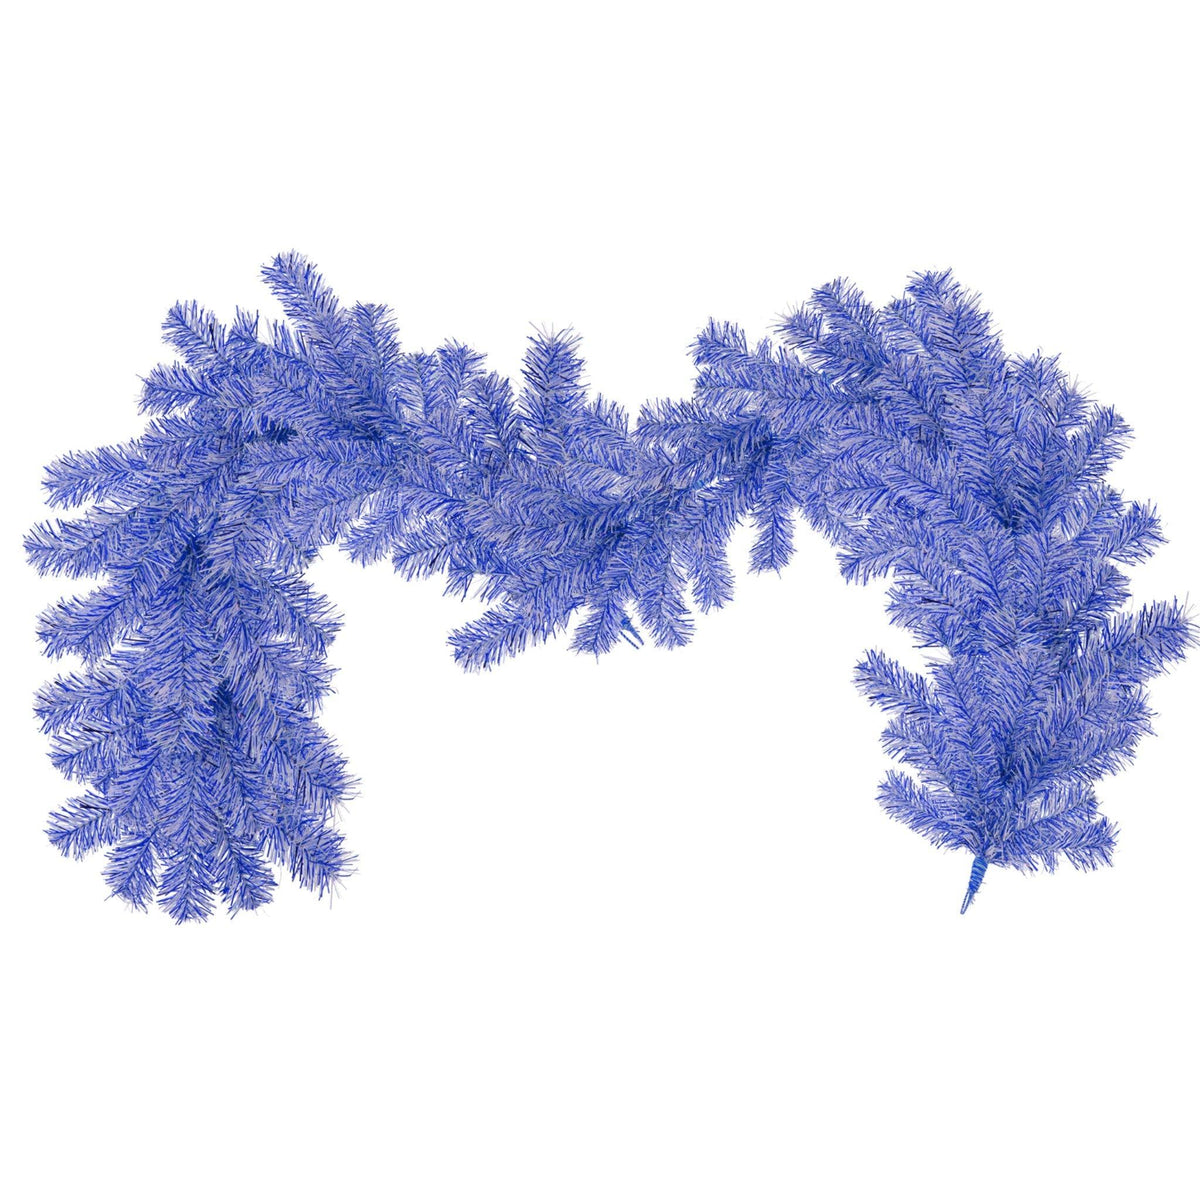 Buy Lee Display's 6FT Blue and White Tinsel Christmas Brush Garlands.  On sale now at leedisplay.com